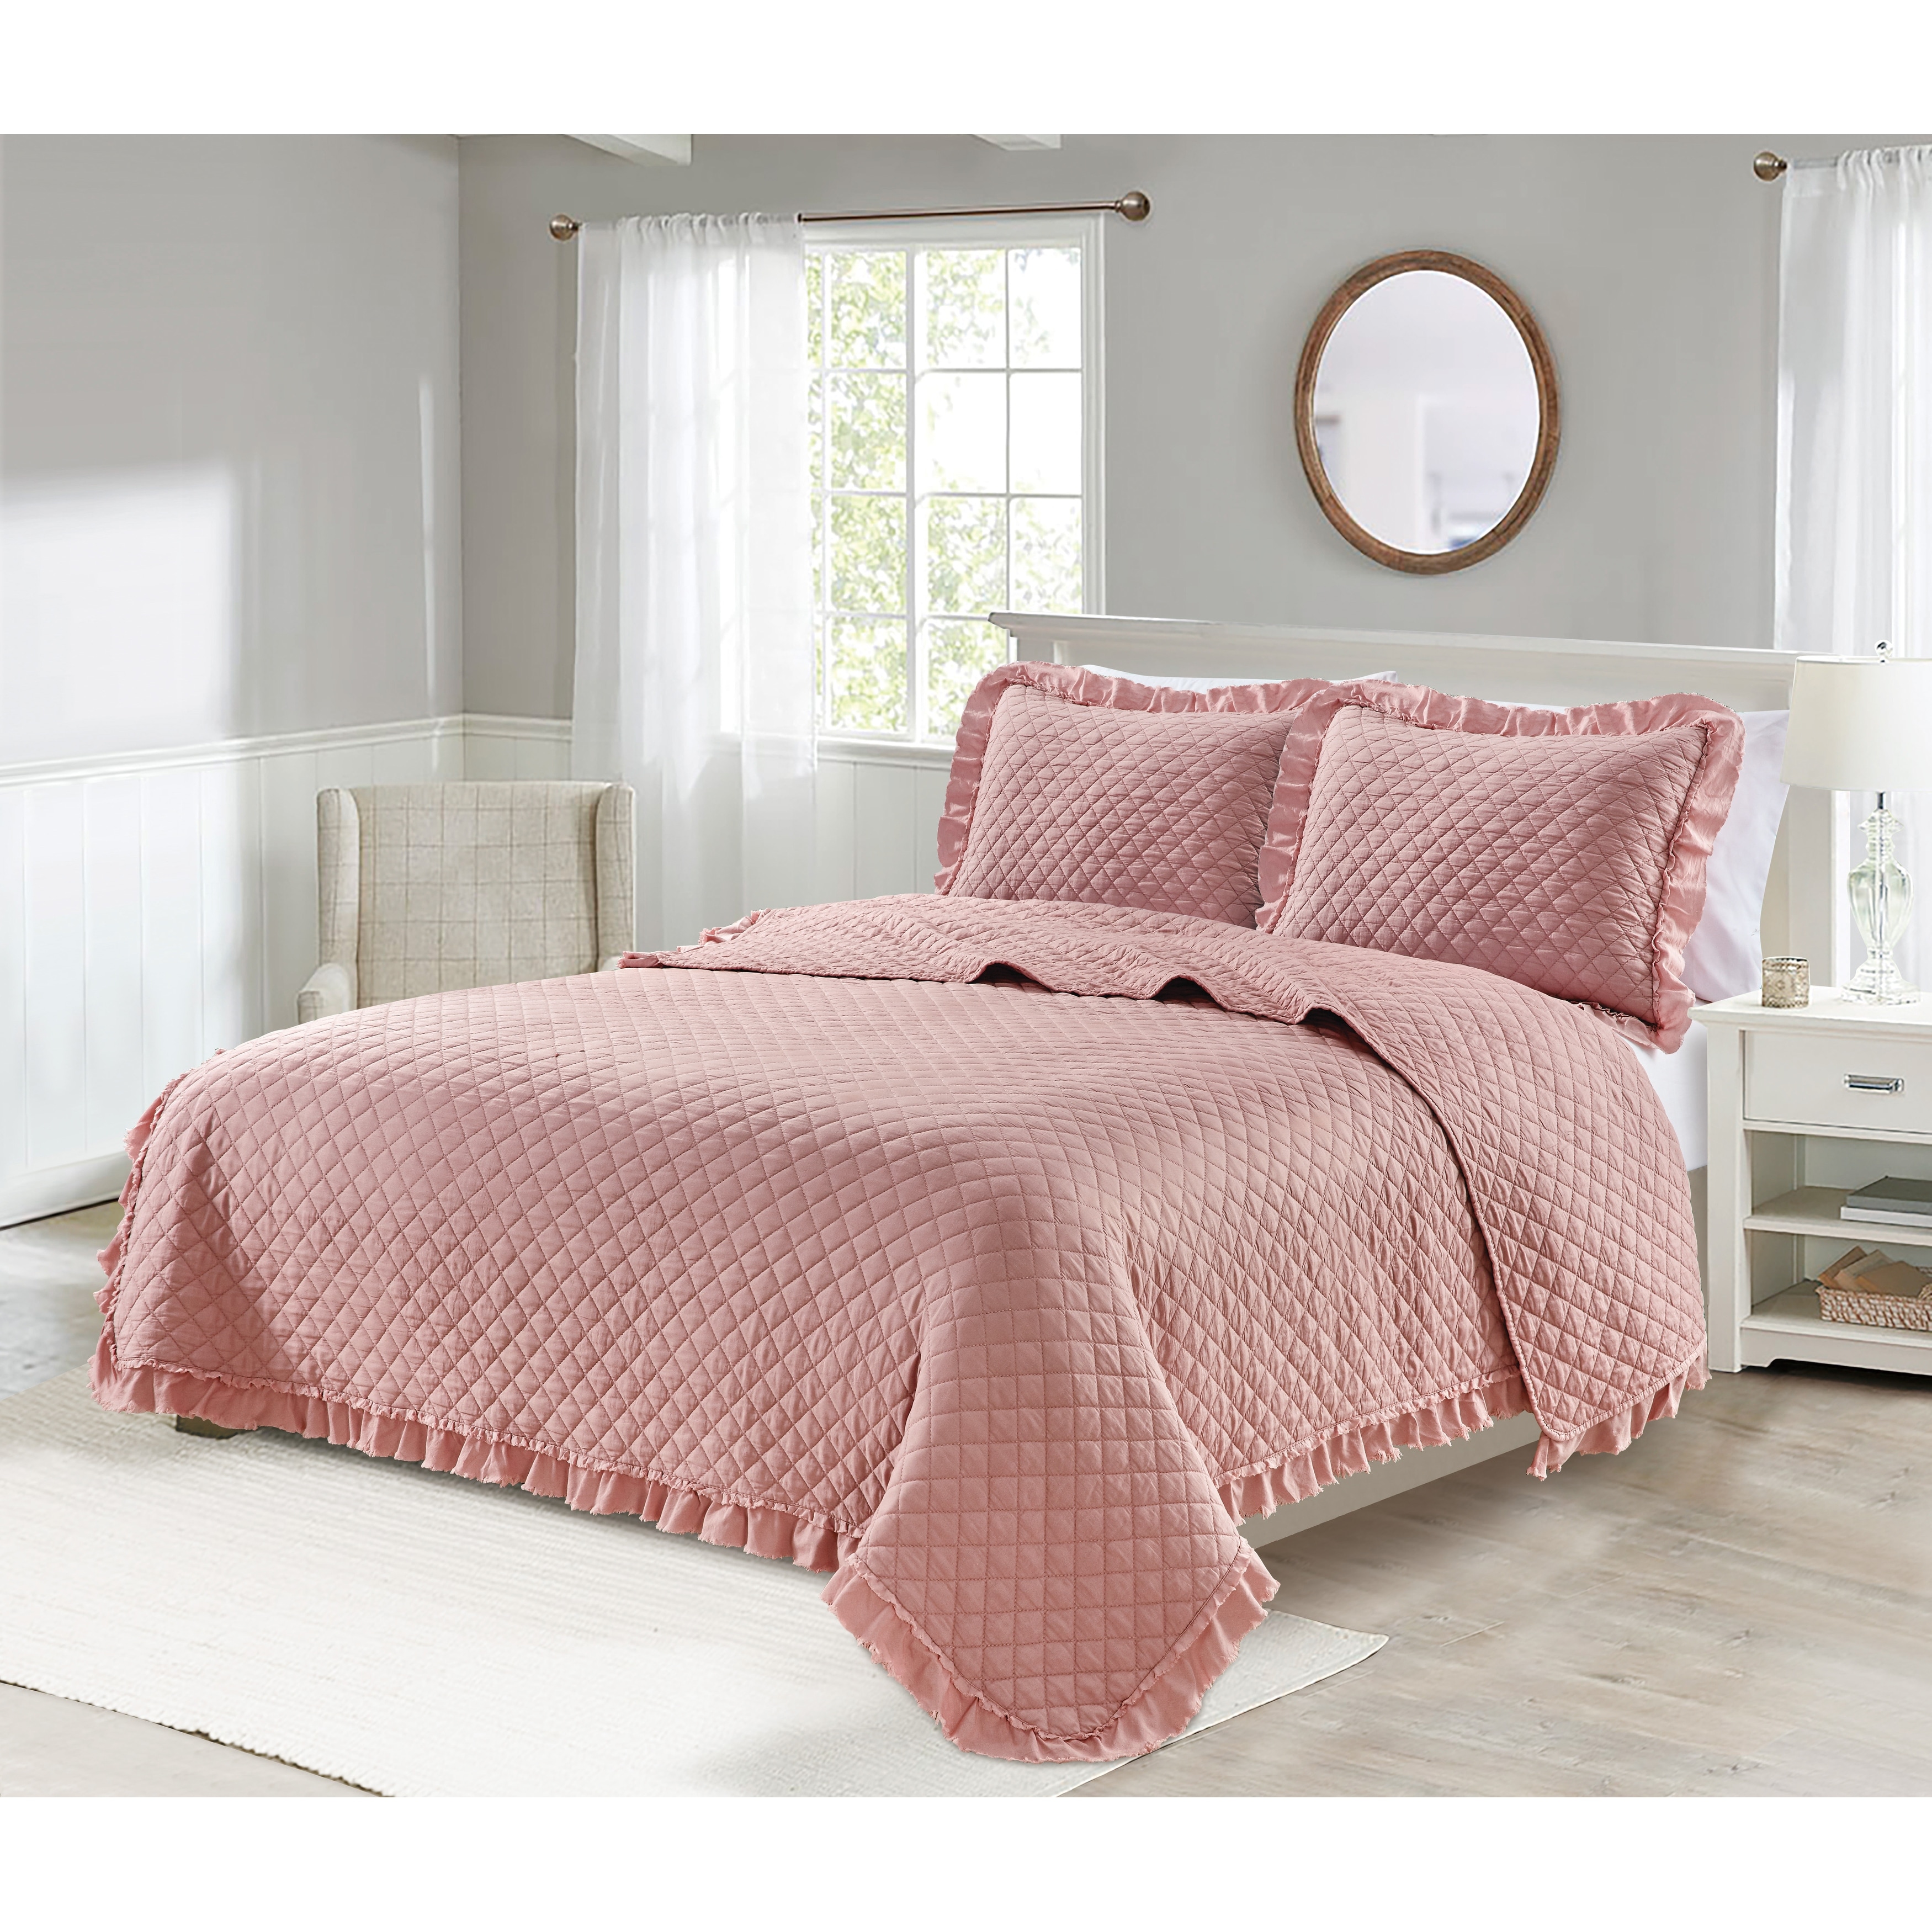 Cubrecamas 9 king size - Bedding Sets & Collections